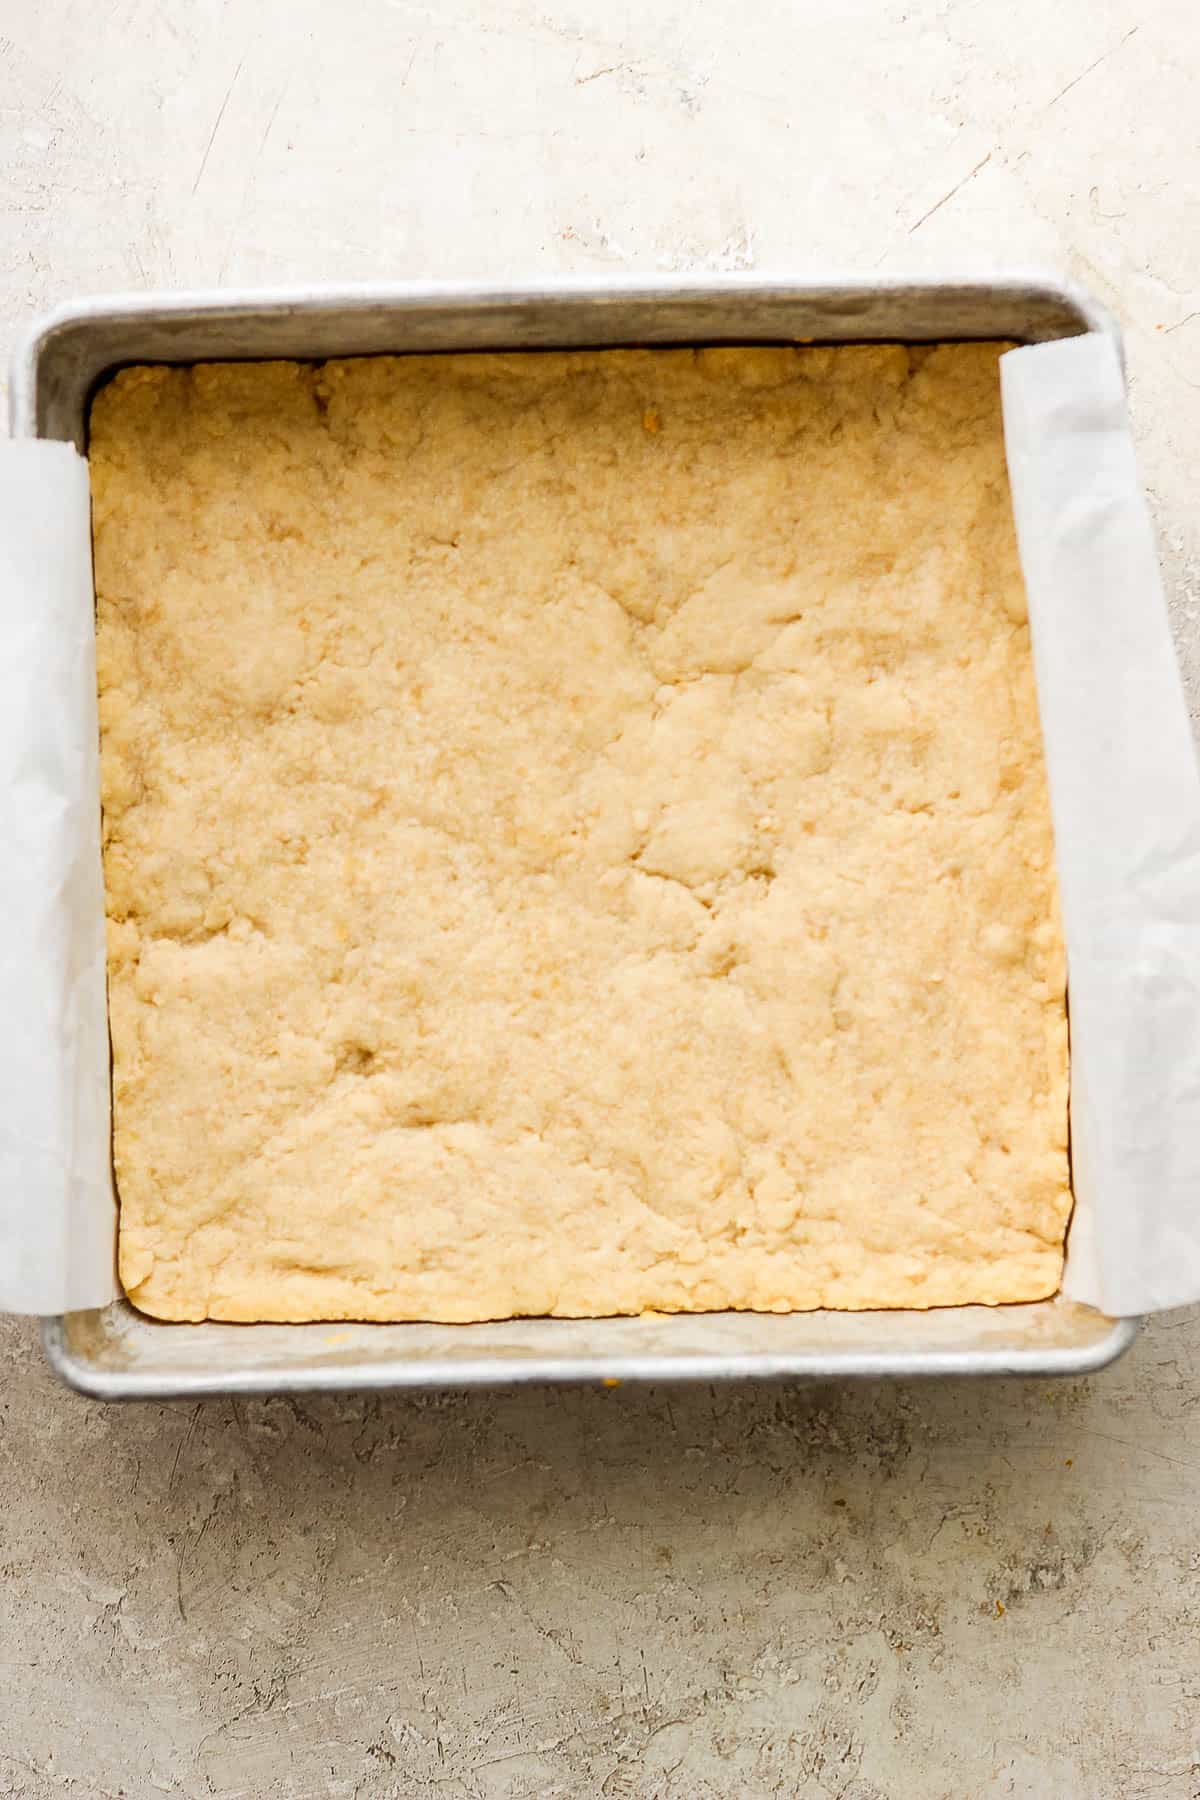 The shortbread filling baked in a parchment-lined baking pan.